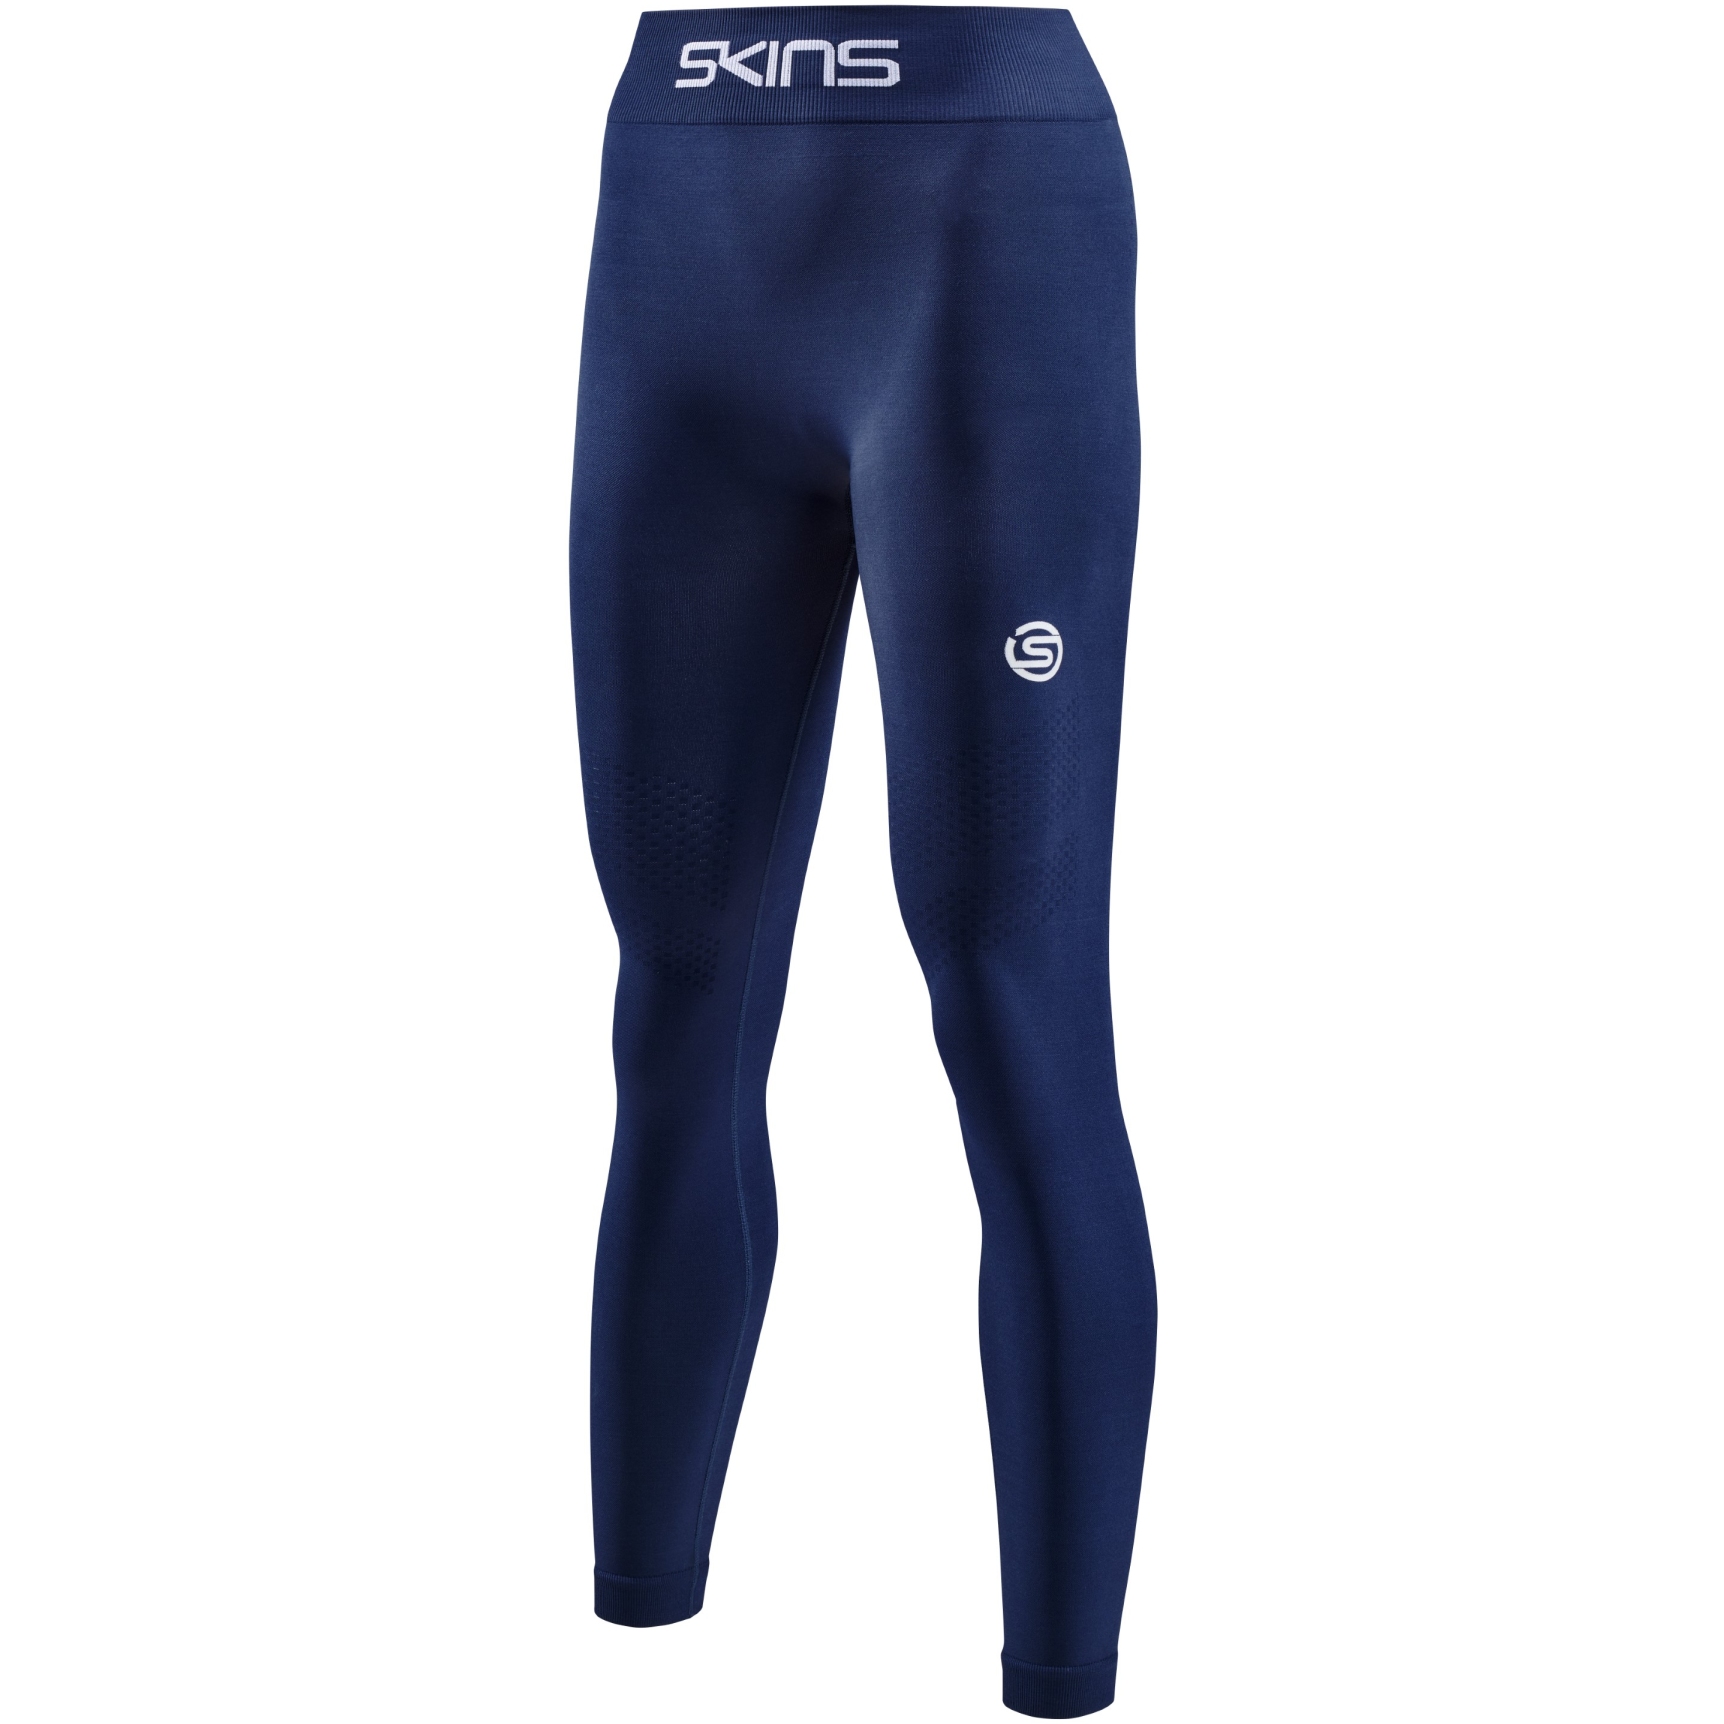 SKINS Compression Women's 3-Series Seamless Long Tights - Navy Blue